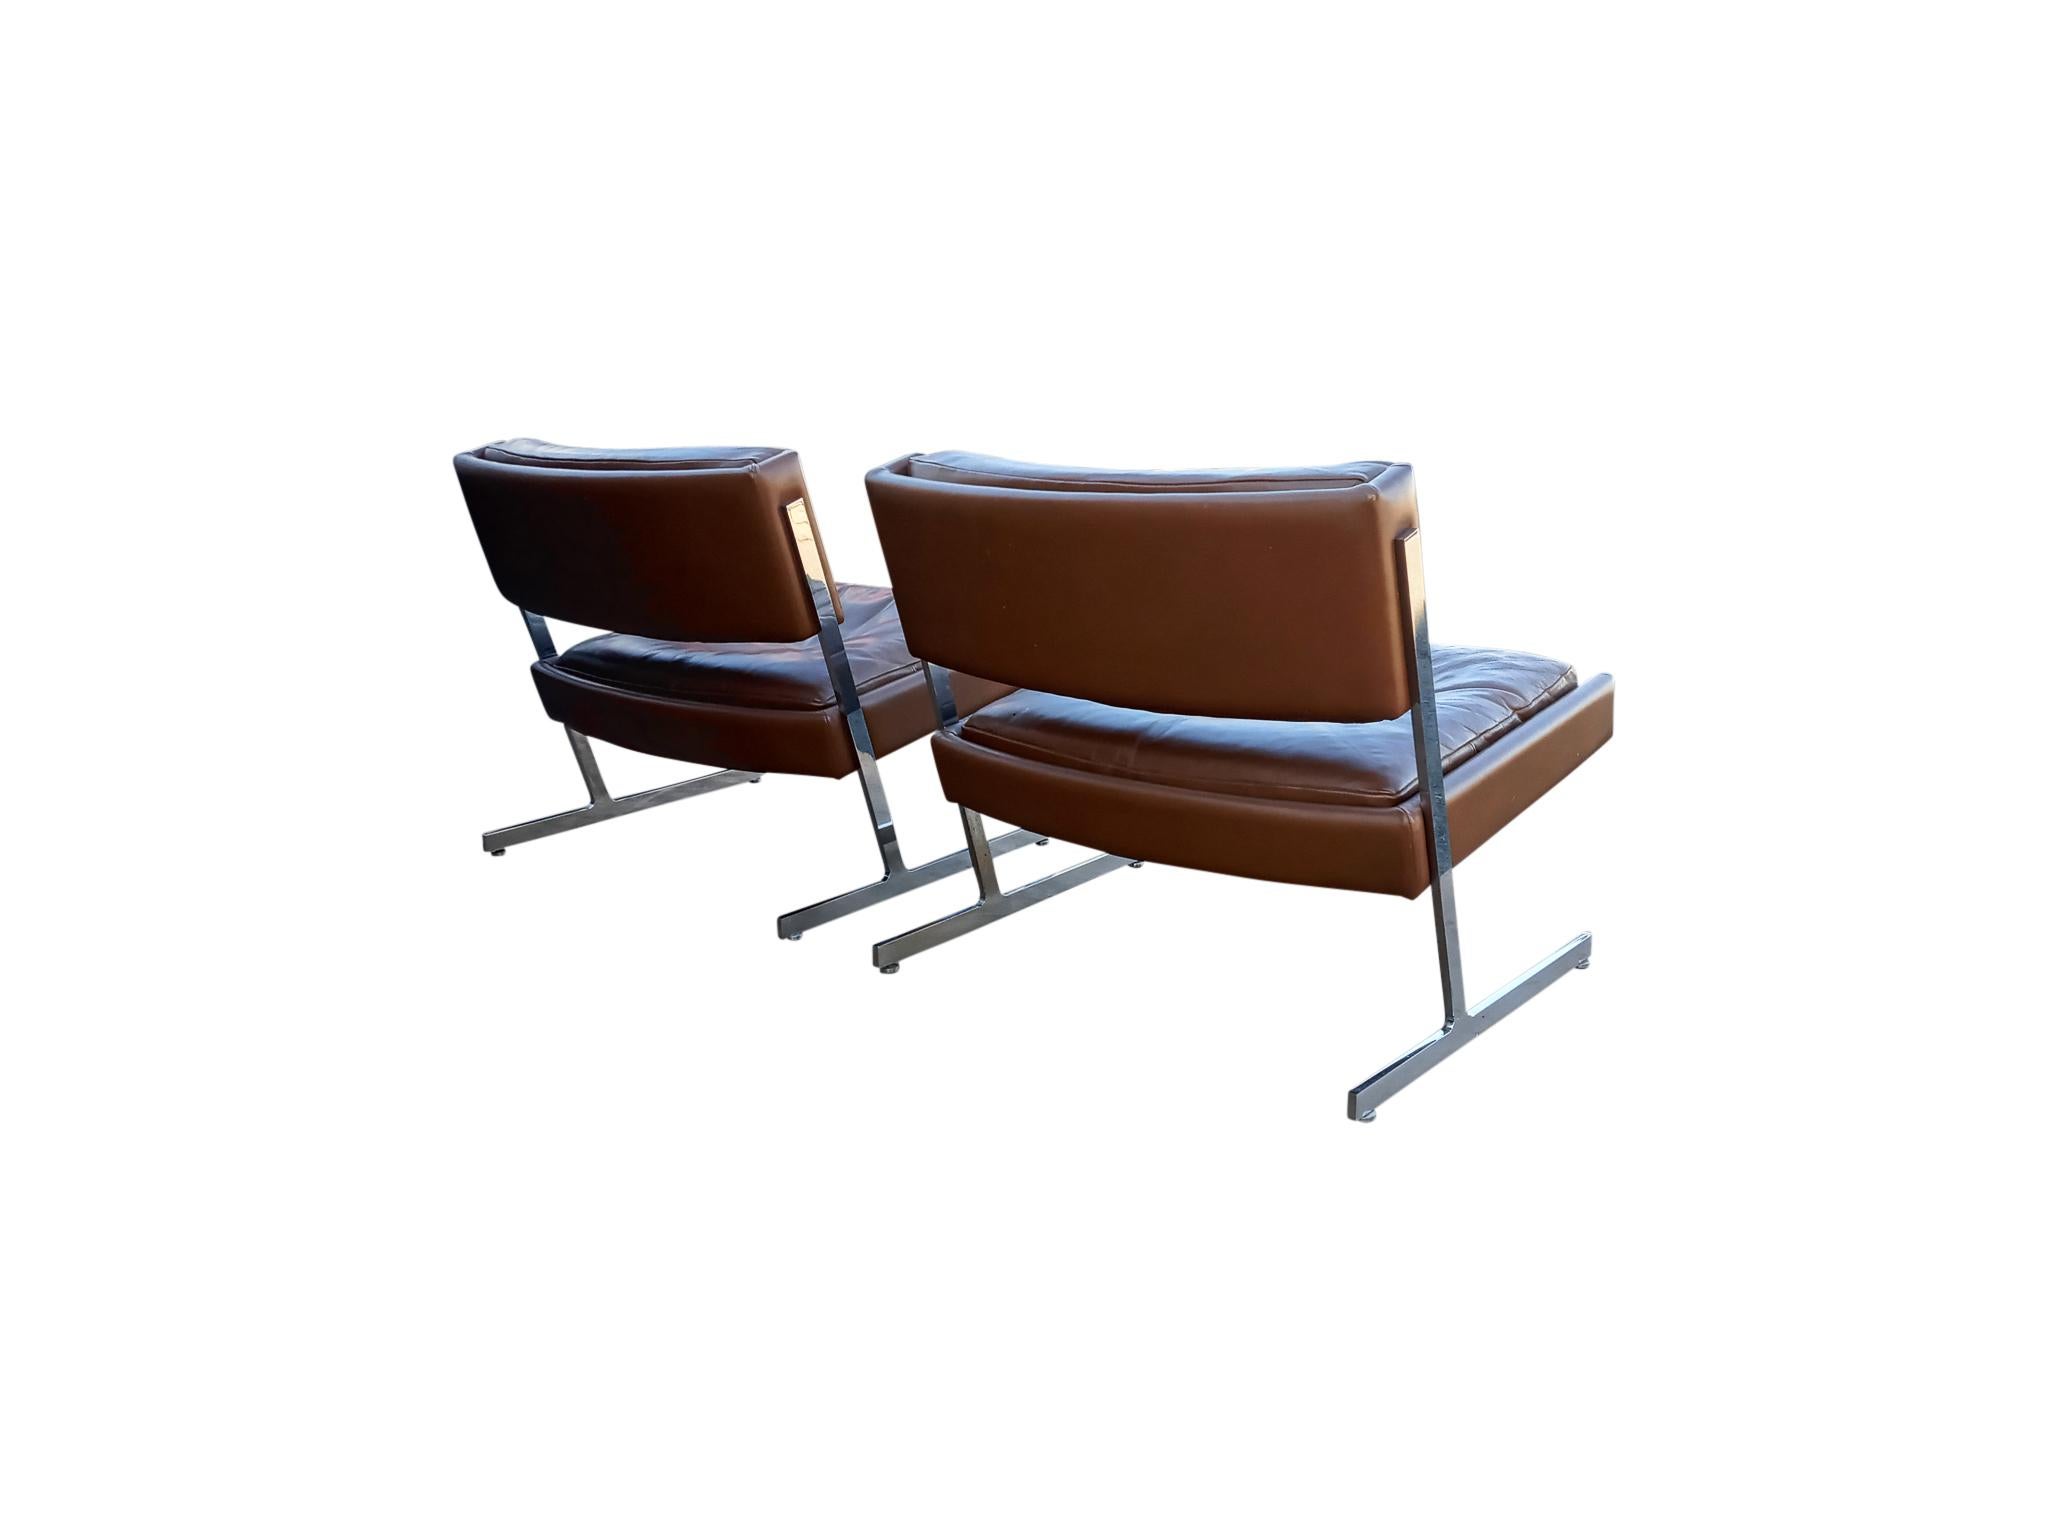 American Harvey Probber Pair of Leather & Chrome Slipper Lounge Chairs Cantilevered Seats For Sale